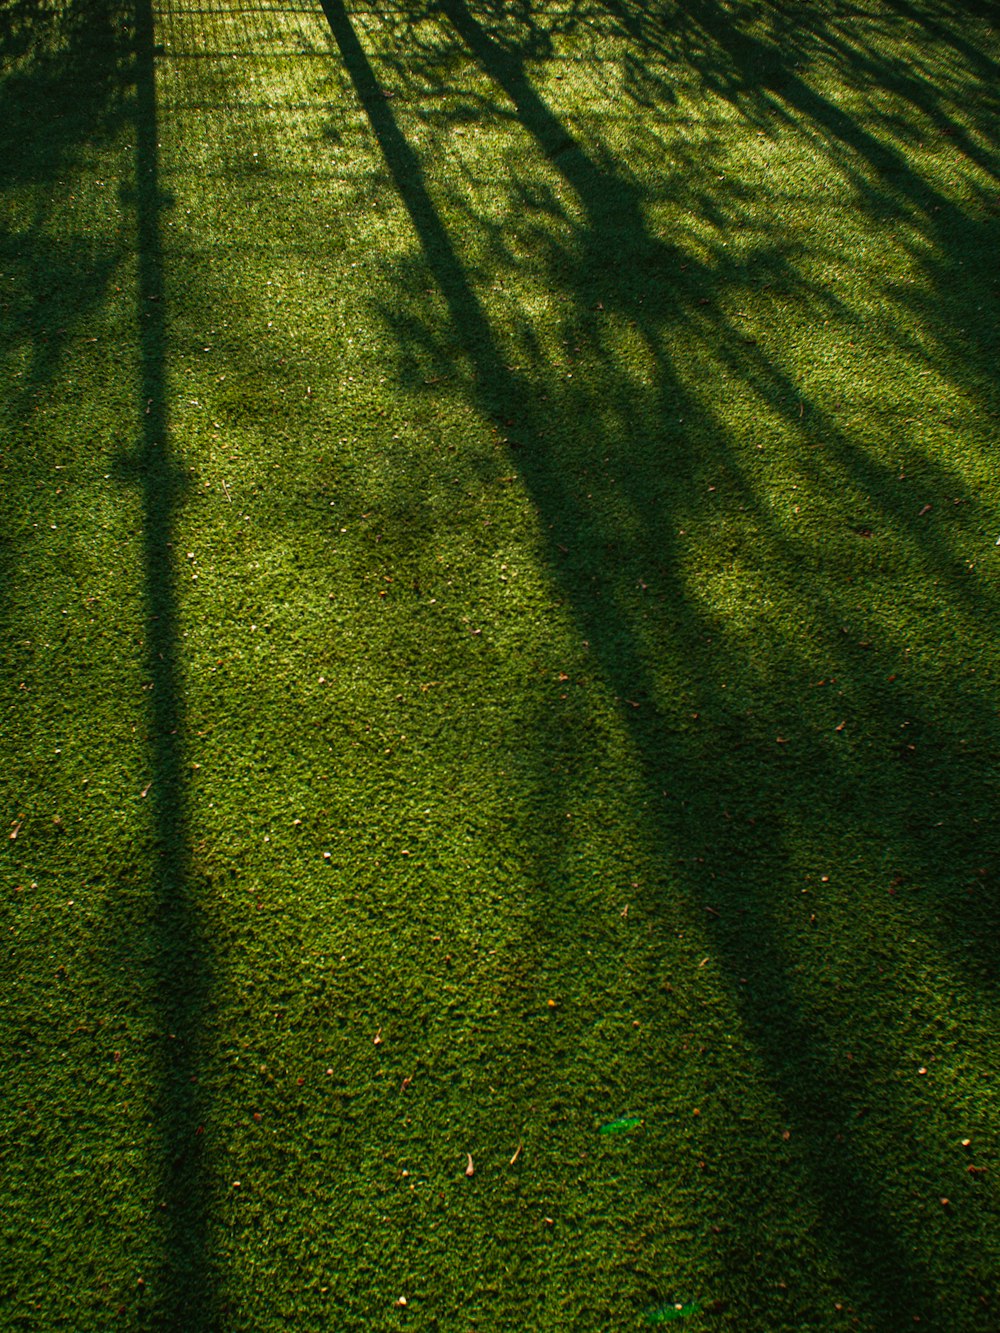 the shadow of a tree on the grass of a tennis court